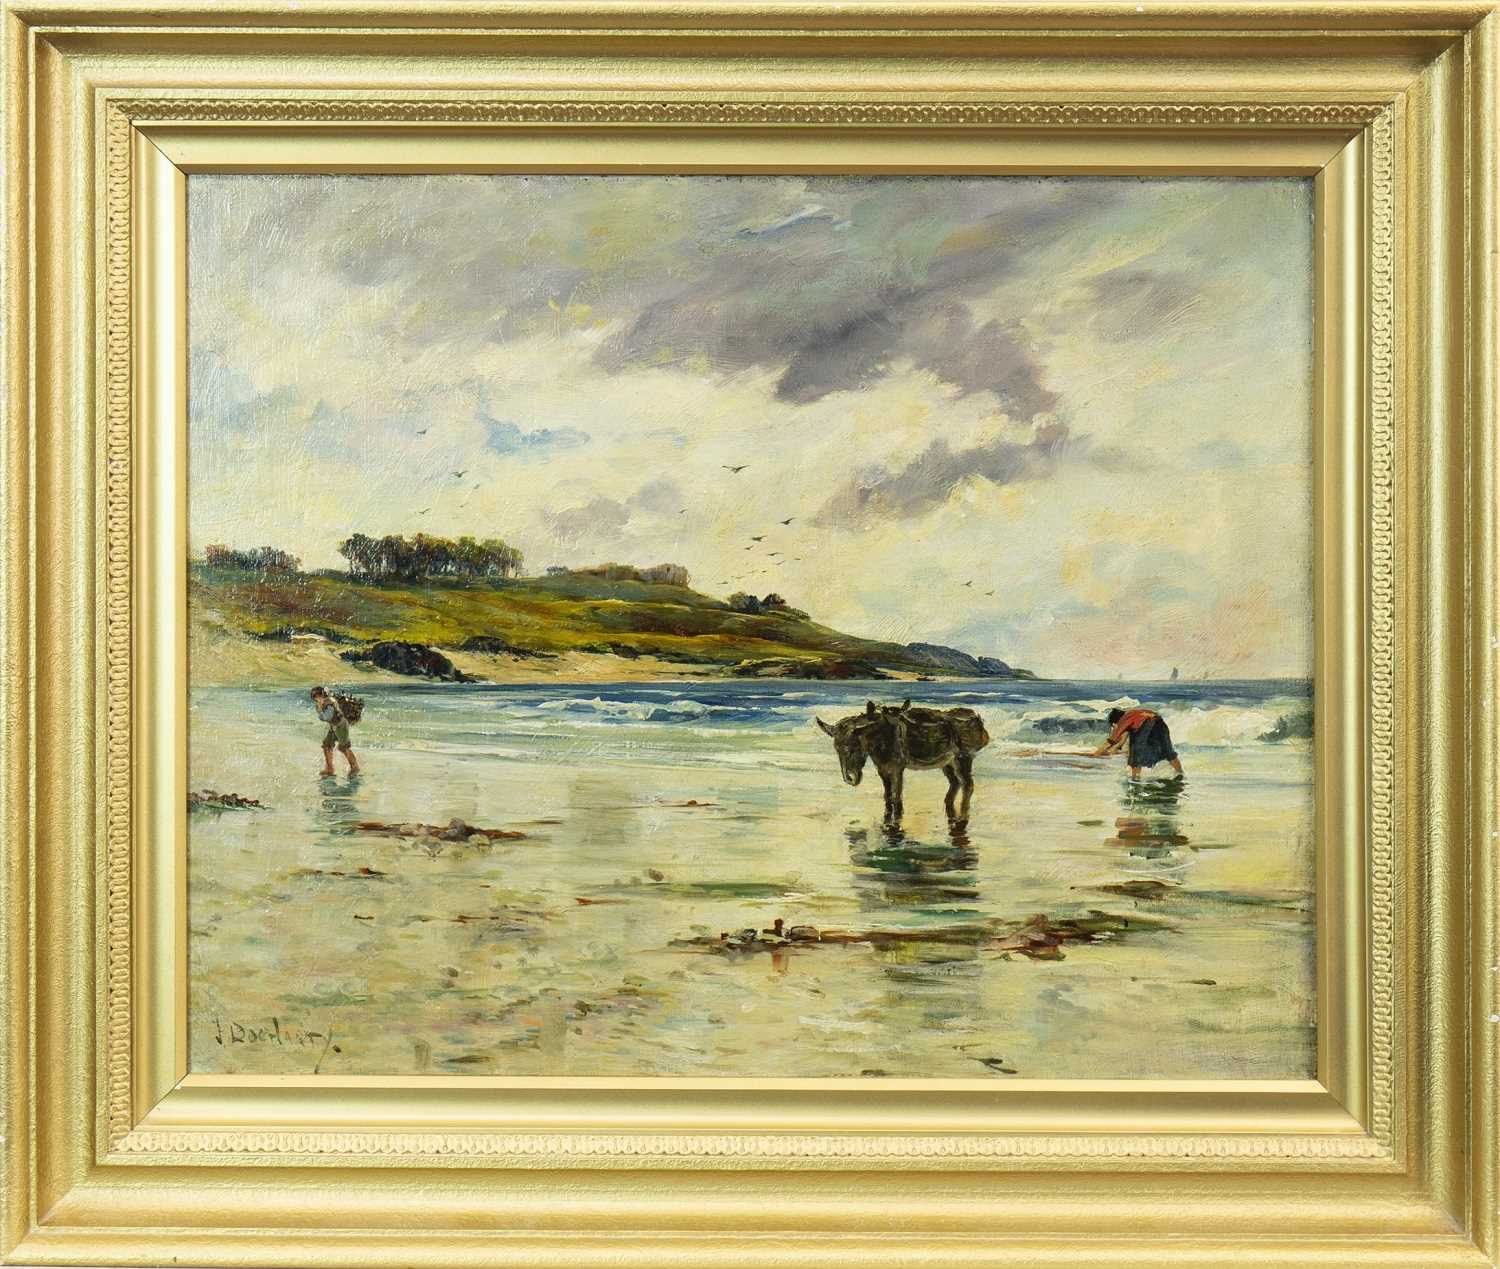 Lot 430 - BEACH SCENE WITH FIGURES AND A DONKEY, AN OIL BY JAMES DOCHARTY